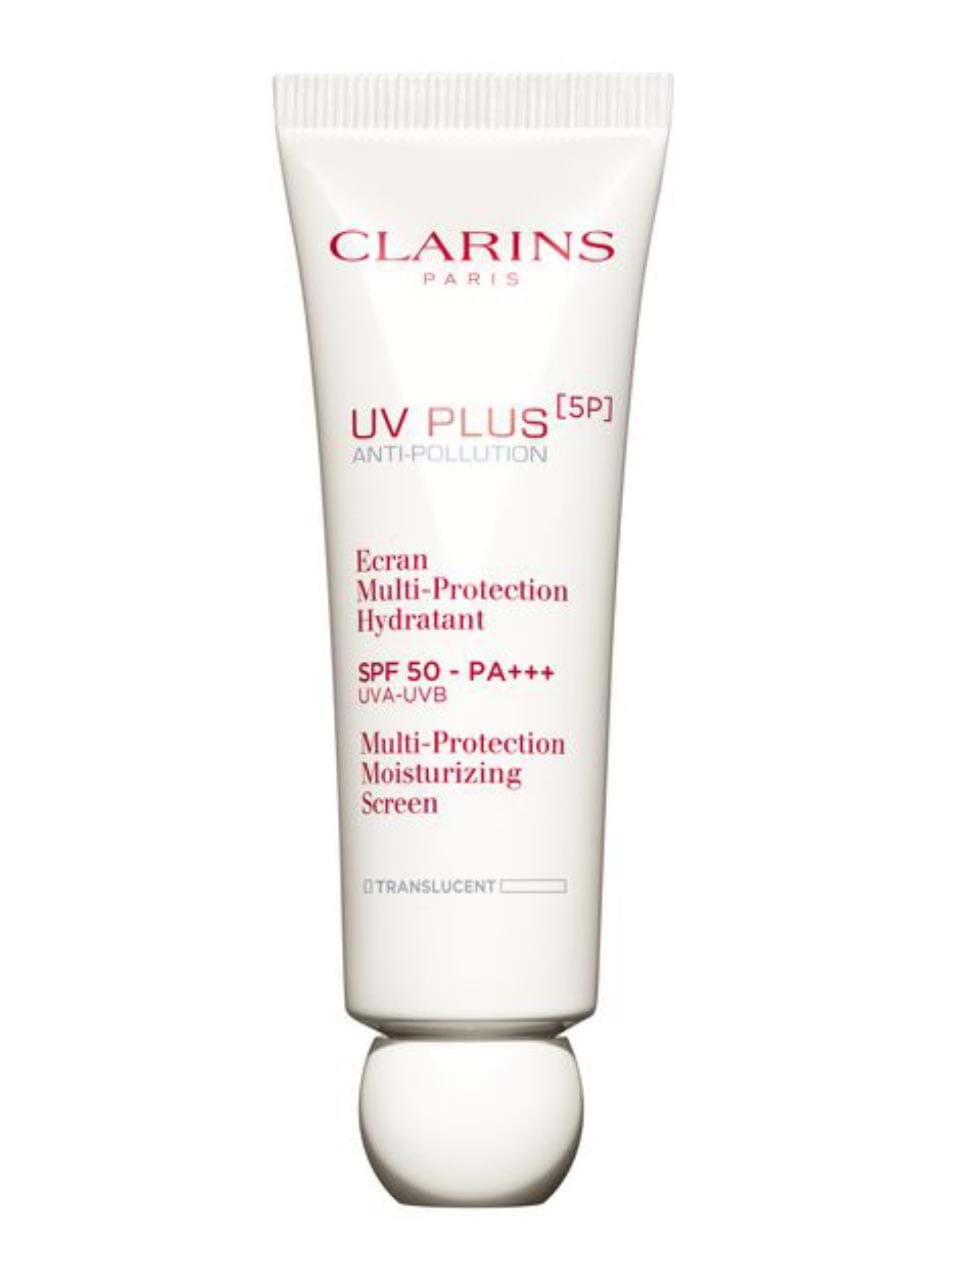 Clarins - highend skin care products - buy Clarins here